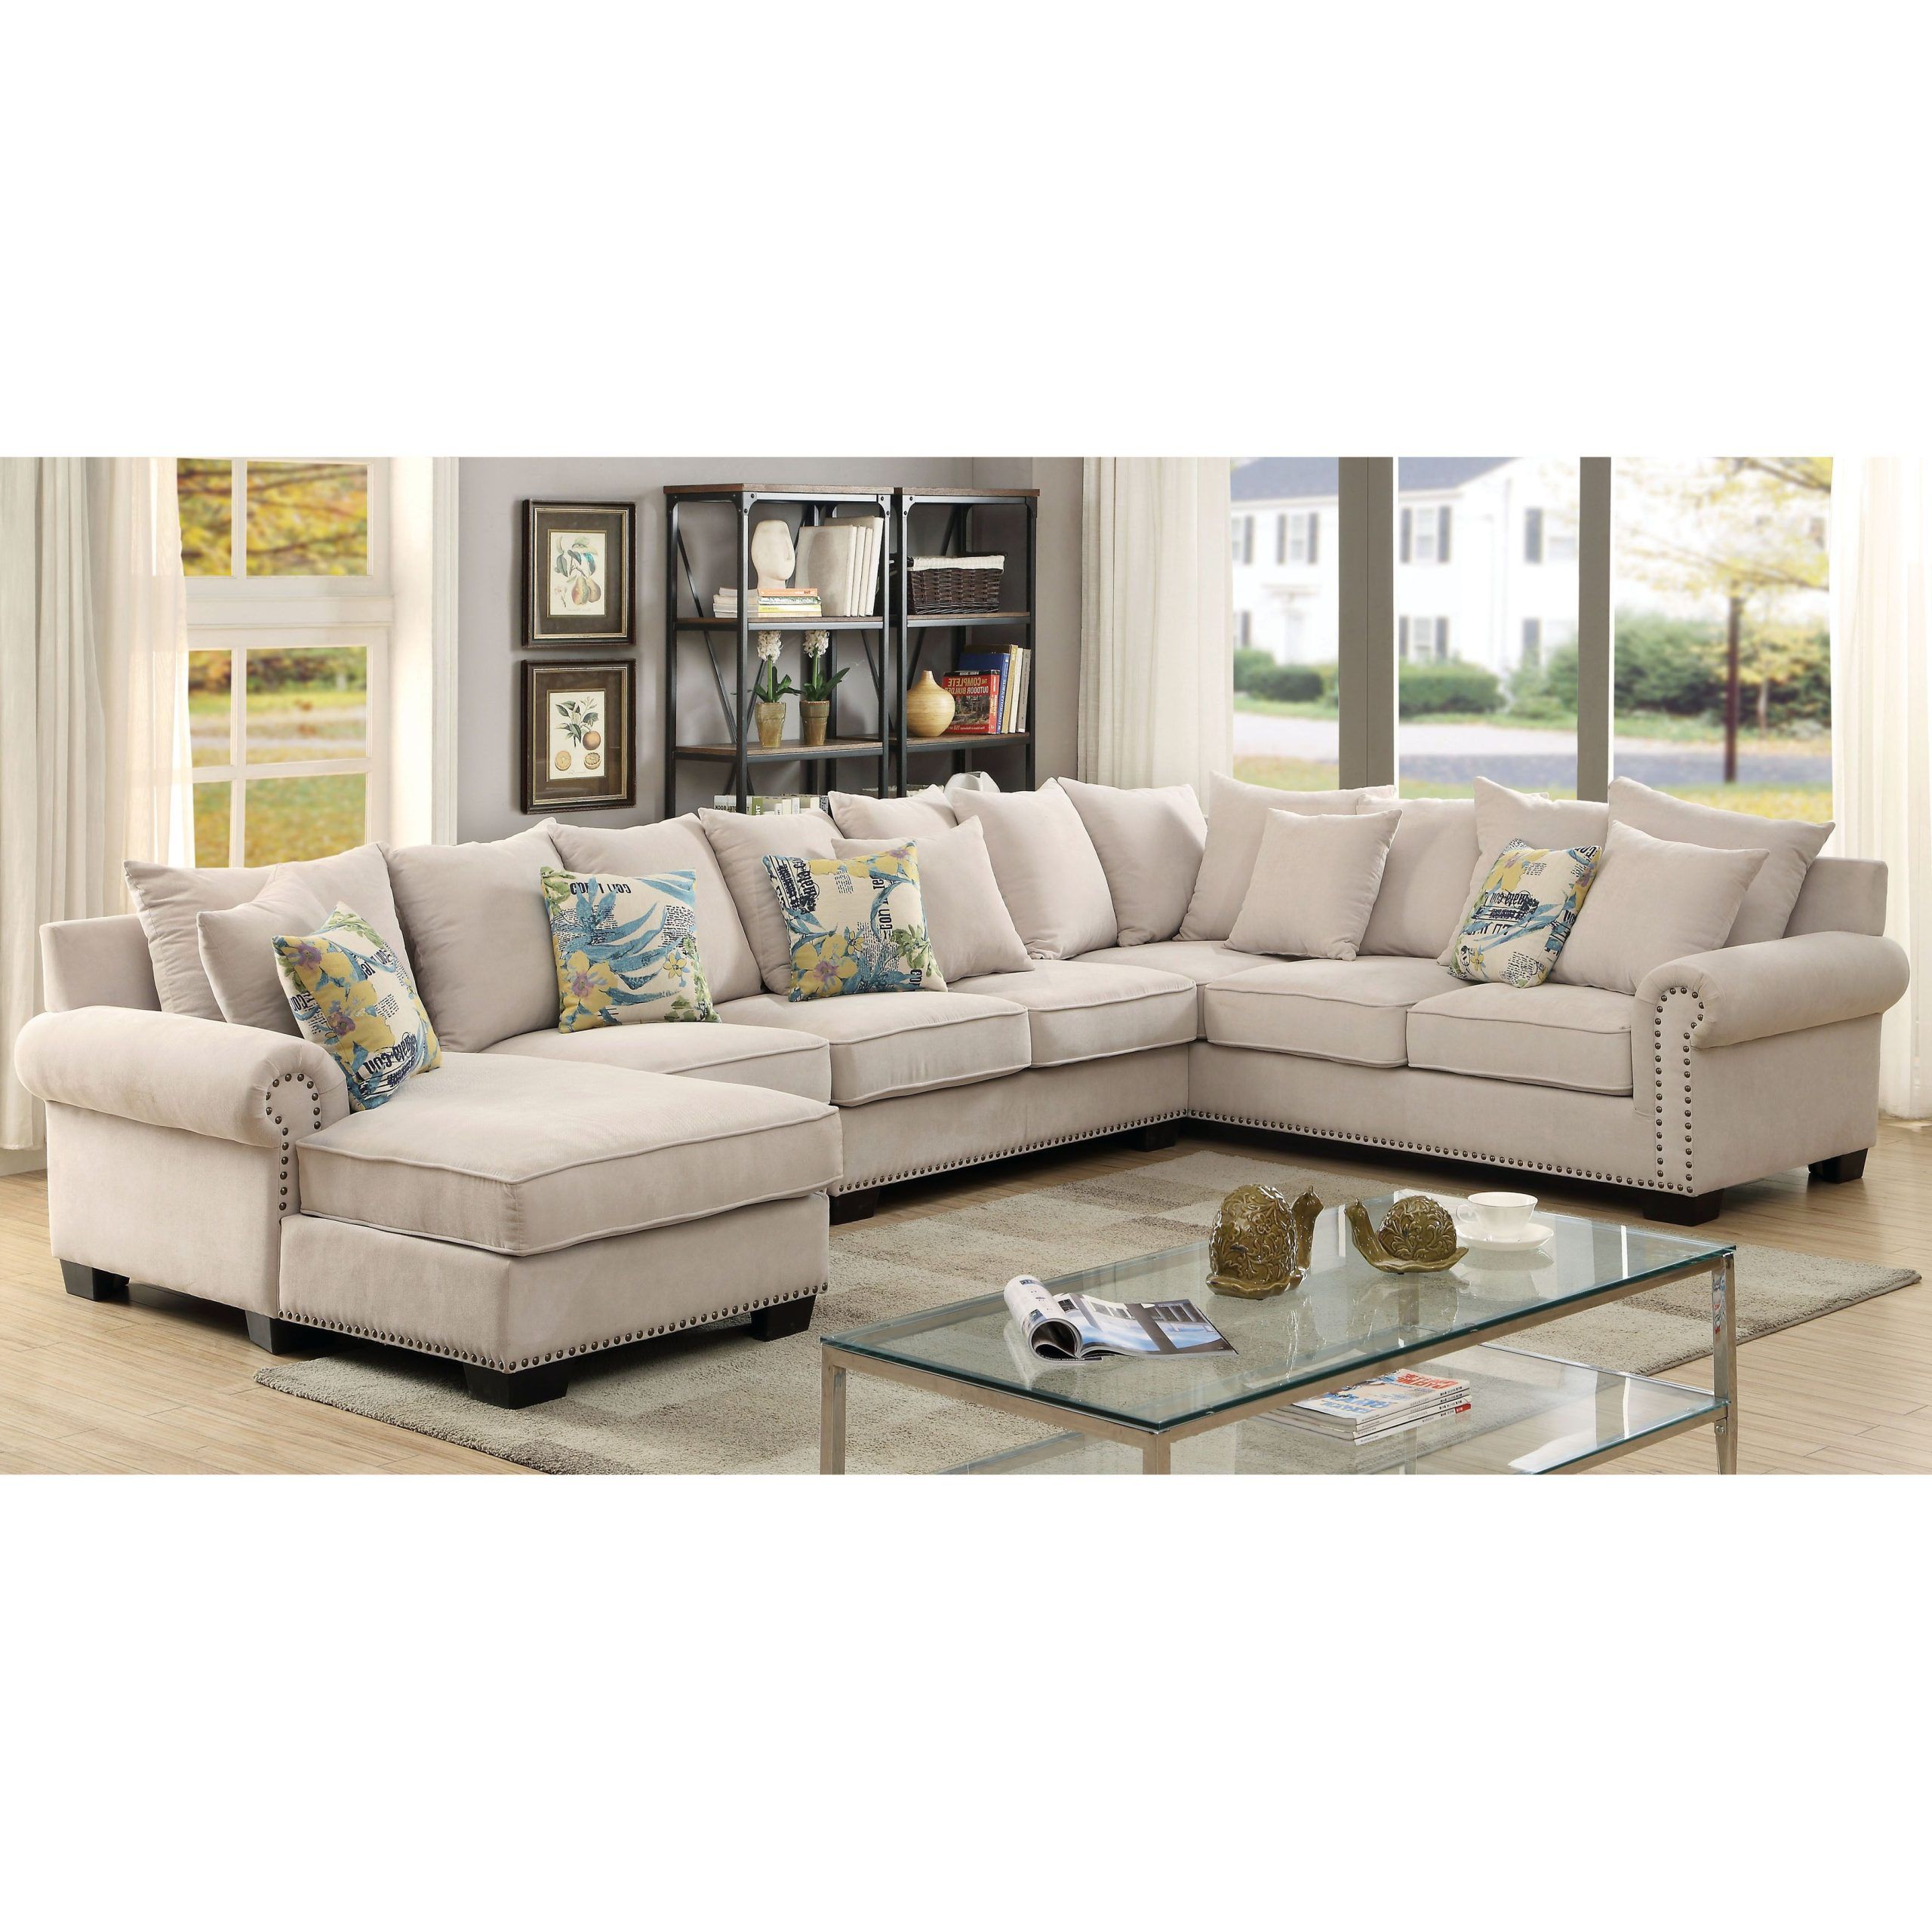 U Shaped Couches In Beige Intended For Most Recent Furniture Of America Riti Contemporary Beige Sectional – On Sale (View 10 of 15)